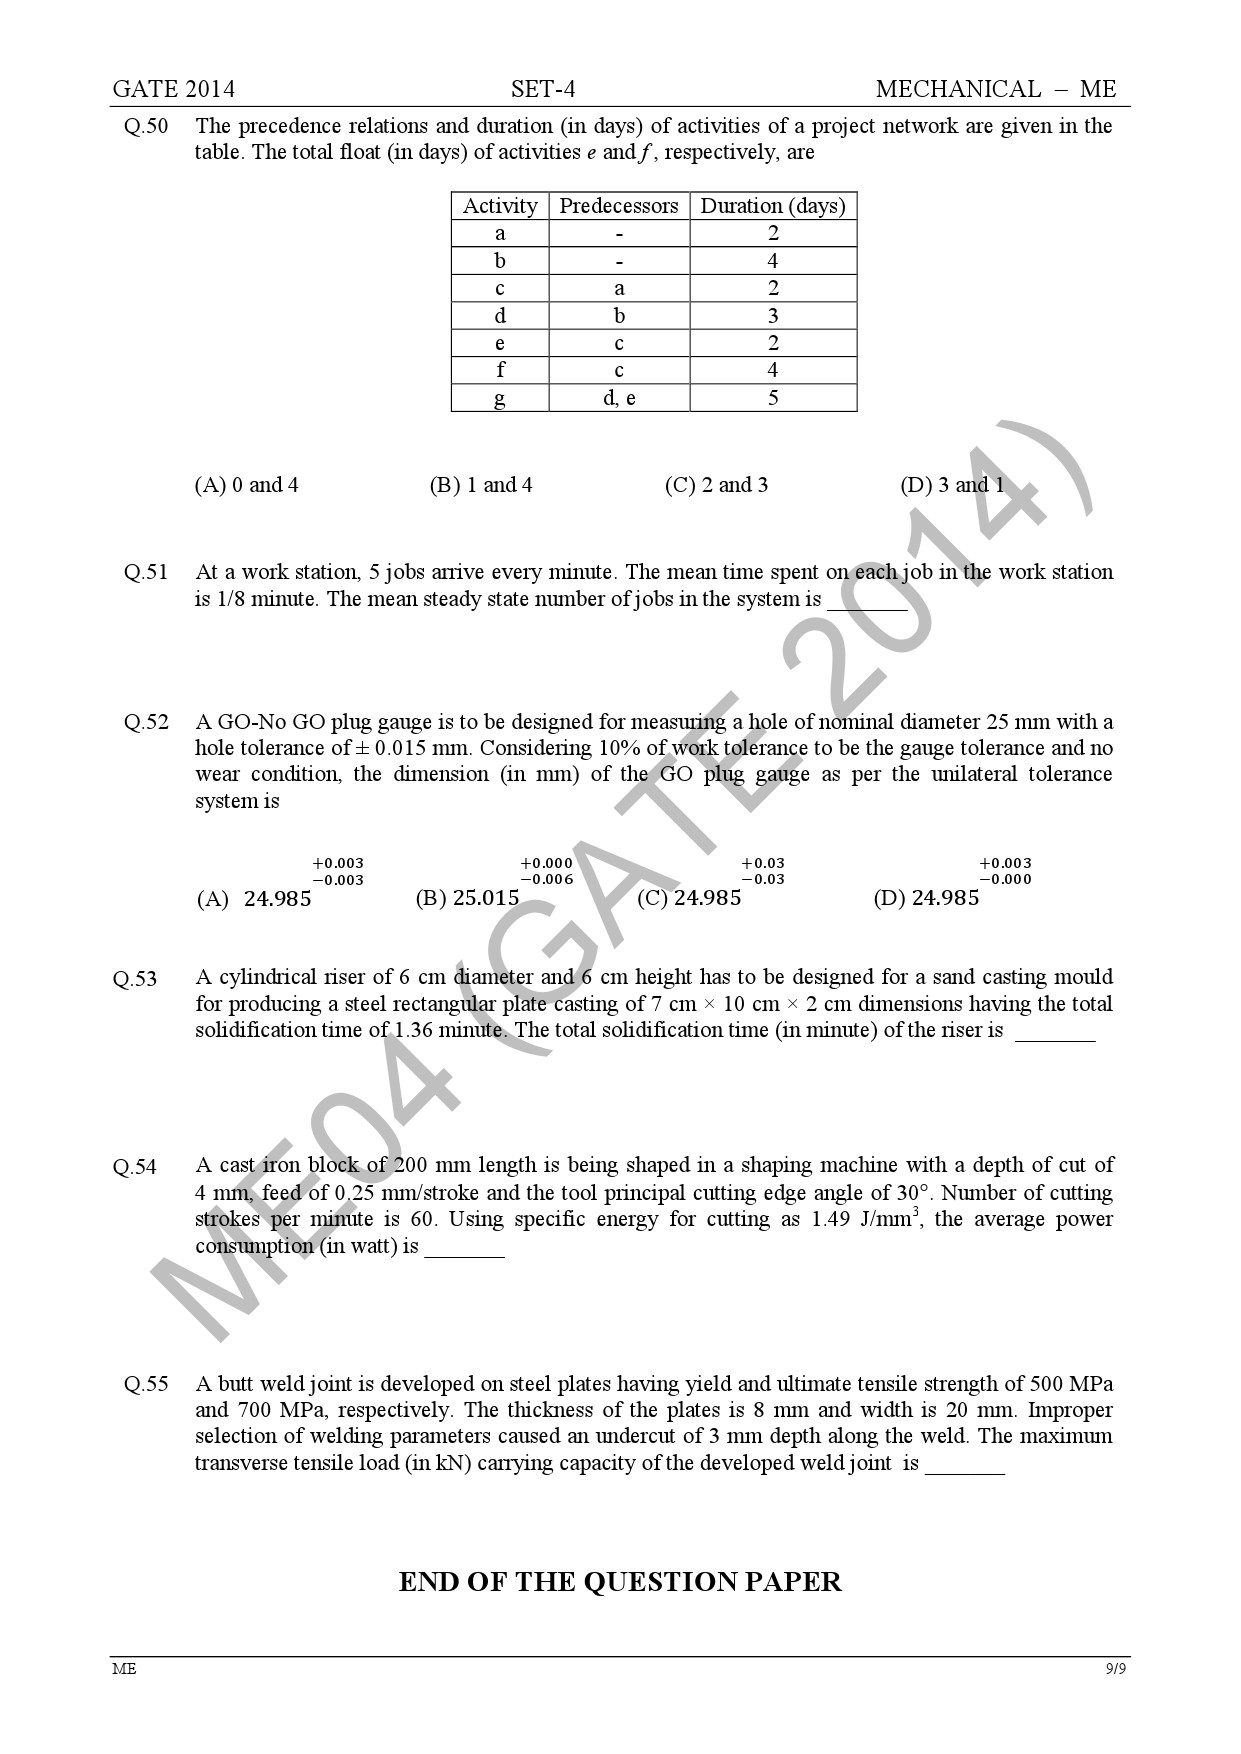 GATE Exam Question Paper 2014 Mechanical Engineering Set 4 15